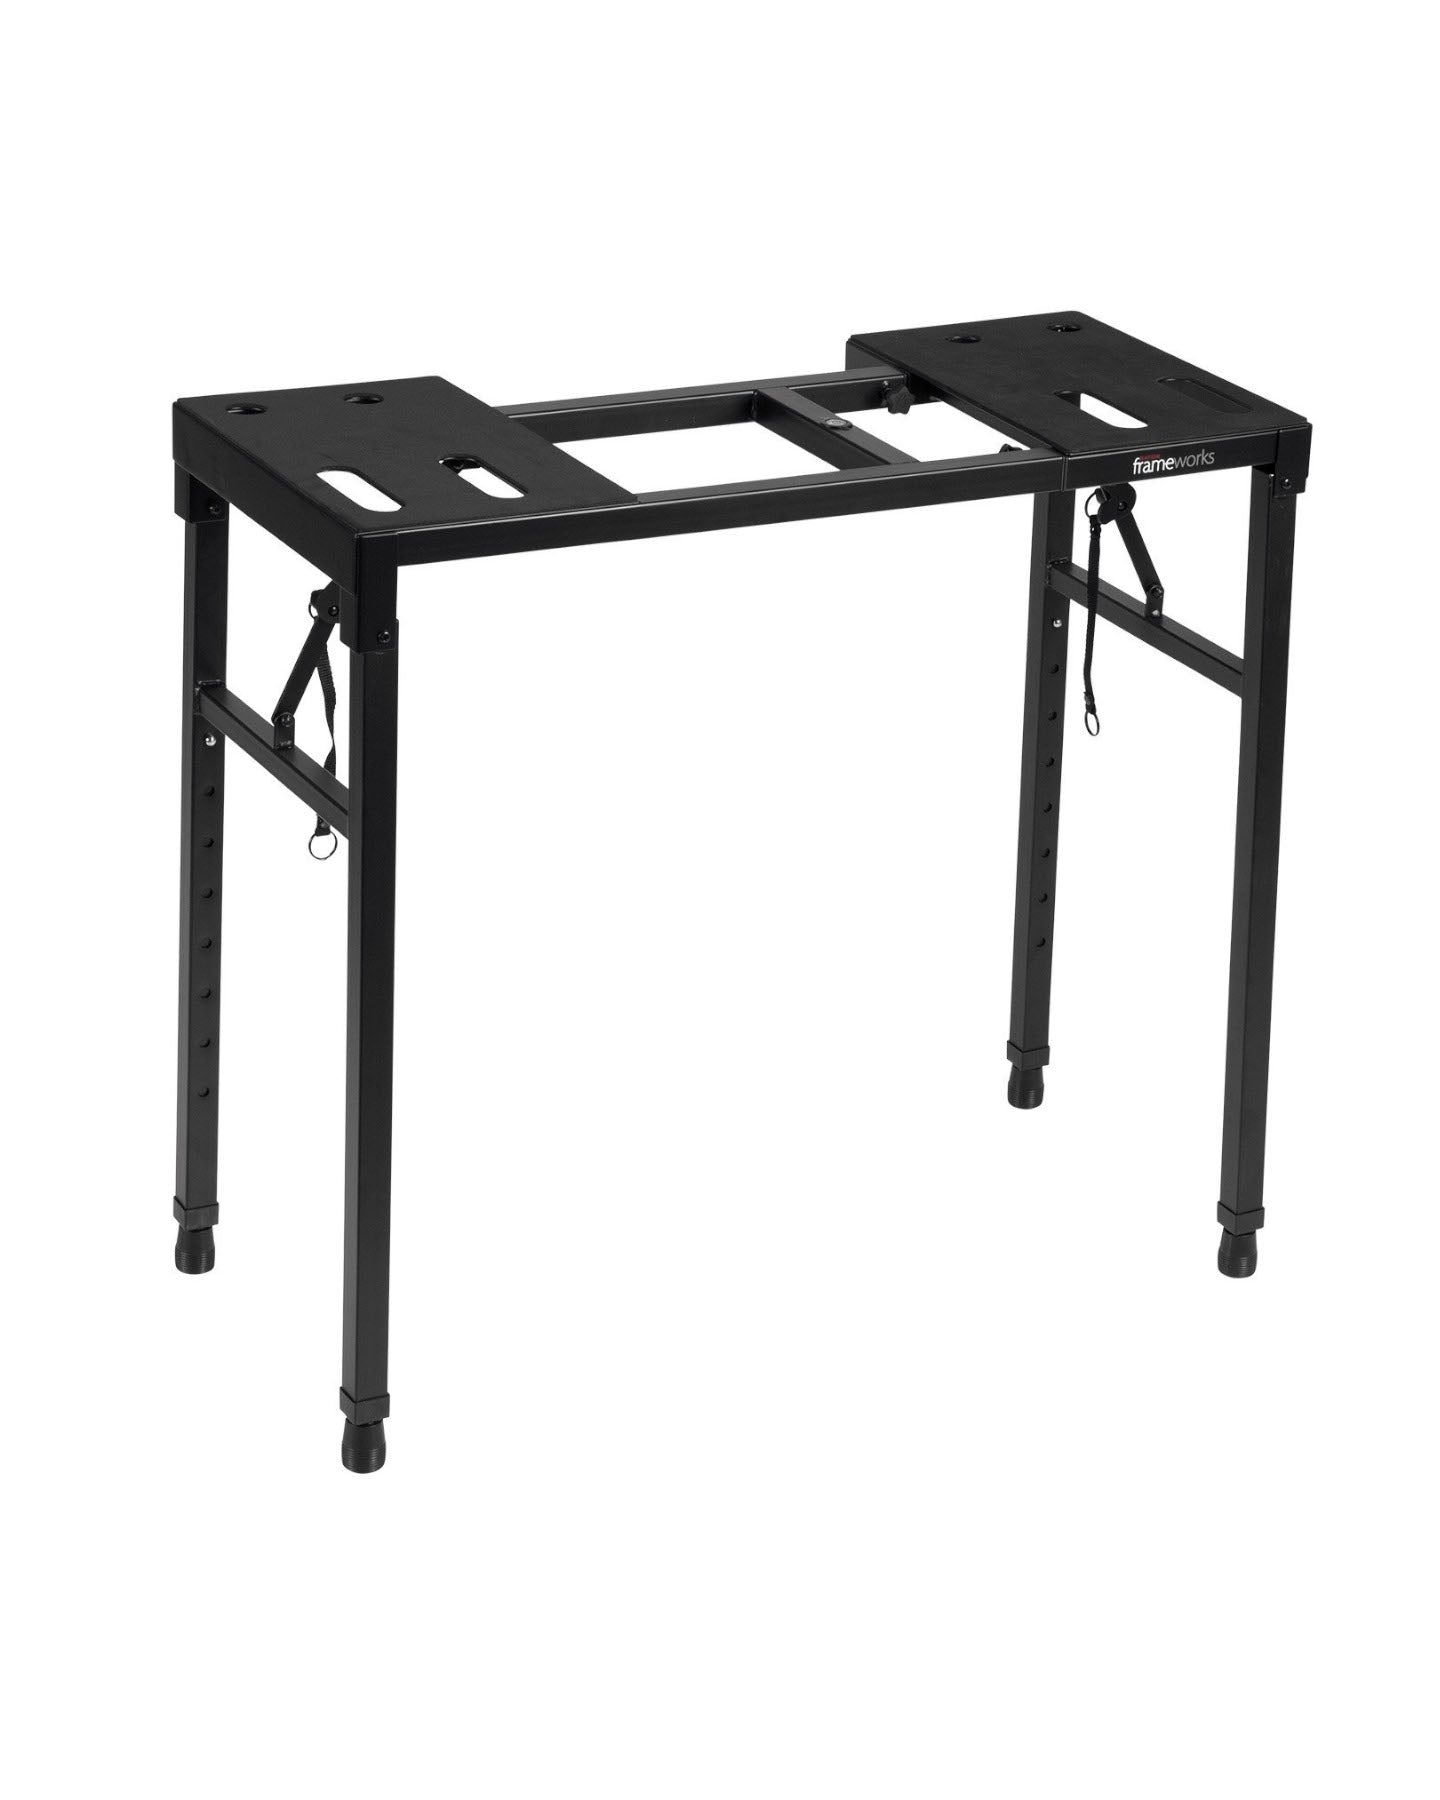 Gator Cases Frameworks Heavy Duty Table w/Multi Adjustable Extrusions